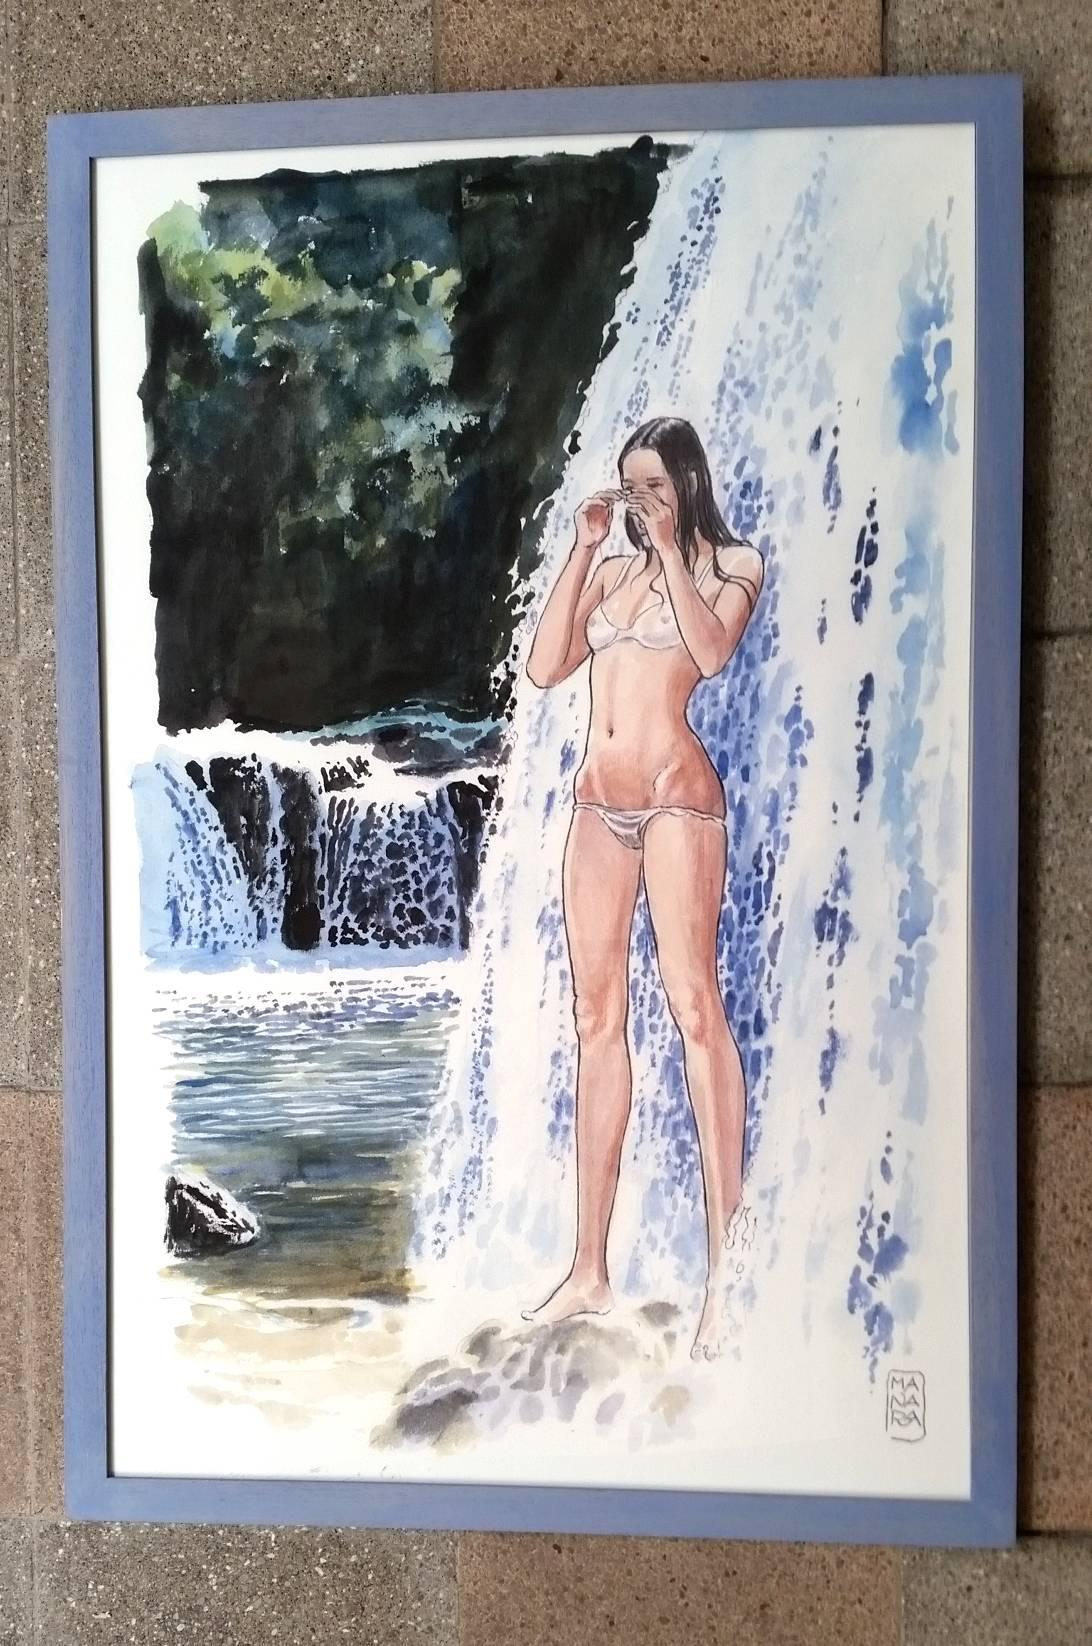 Woman in the waterfall - 2015 - Painting by Milo Manara